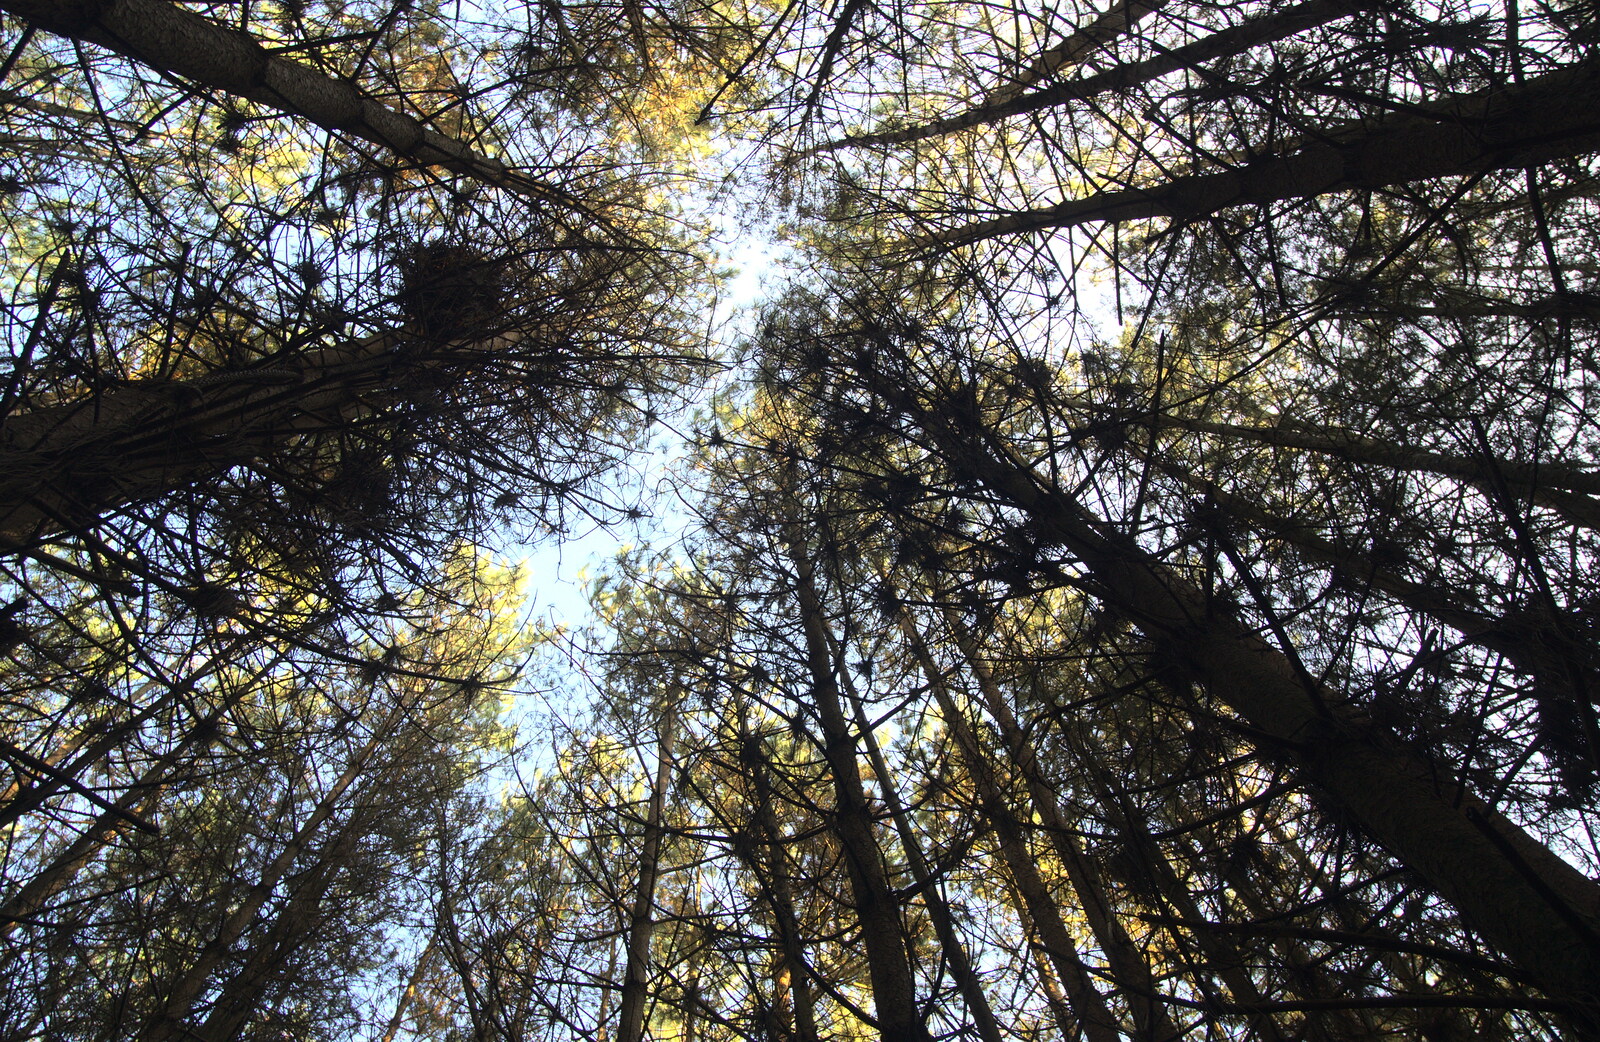 Looking skyward through the tall pine trees from A Day at High Lodge, Brandon Forest, Suffolk - 26th October 2015